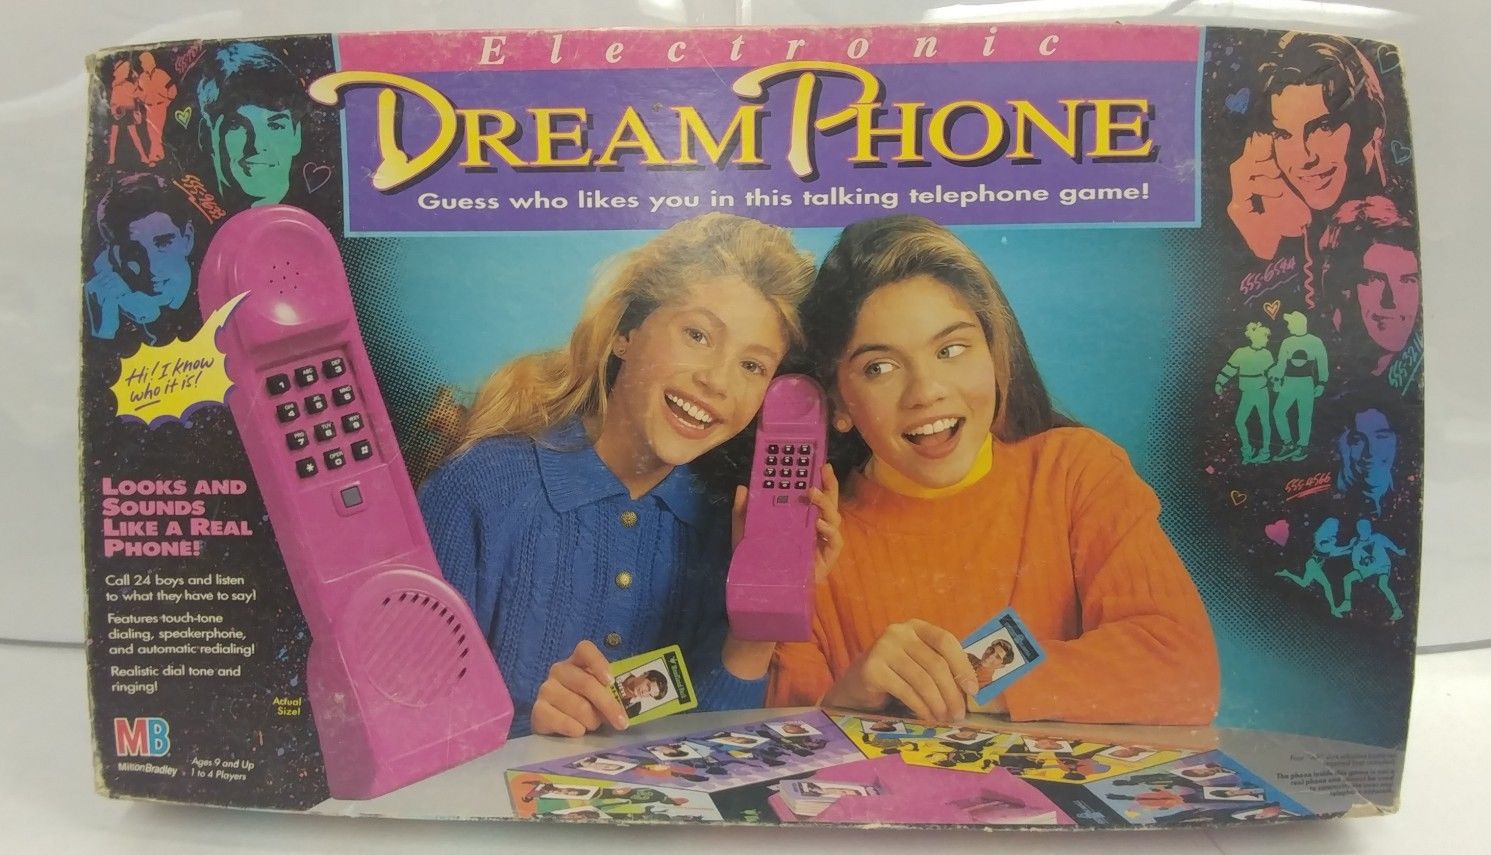 We All Had Our Favorite Dream Phone Guy, But Which One Would You Pick Now?